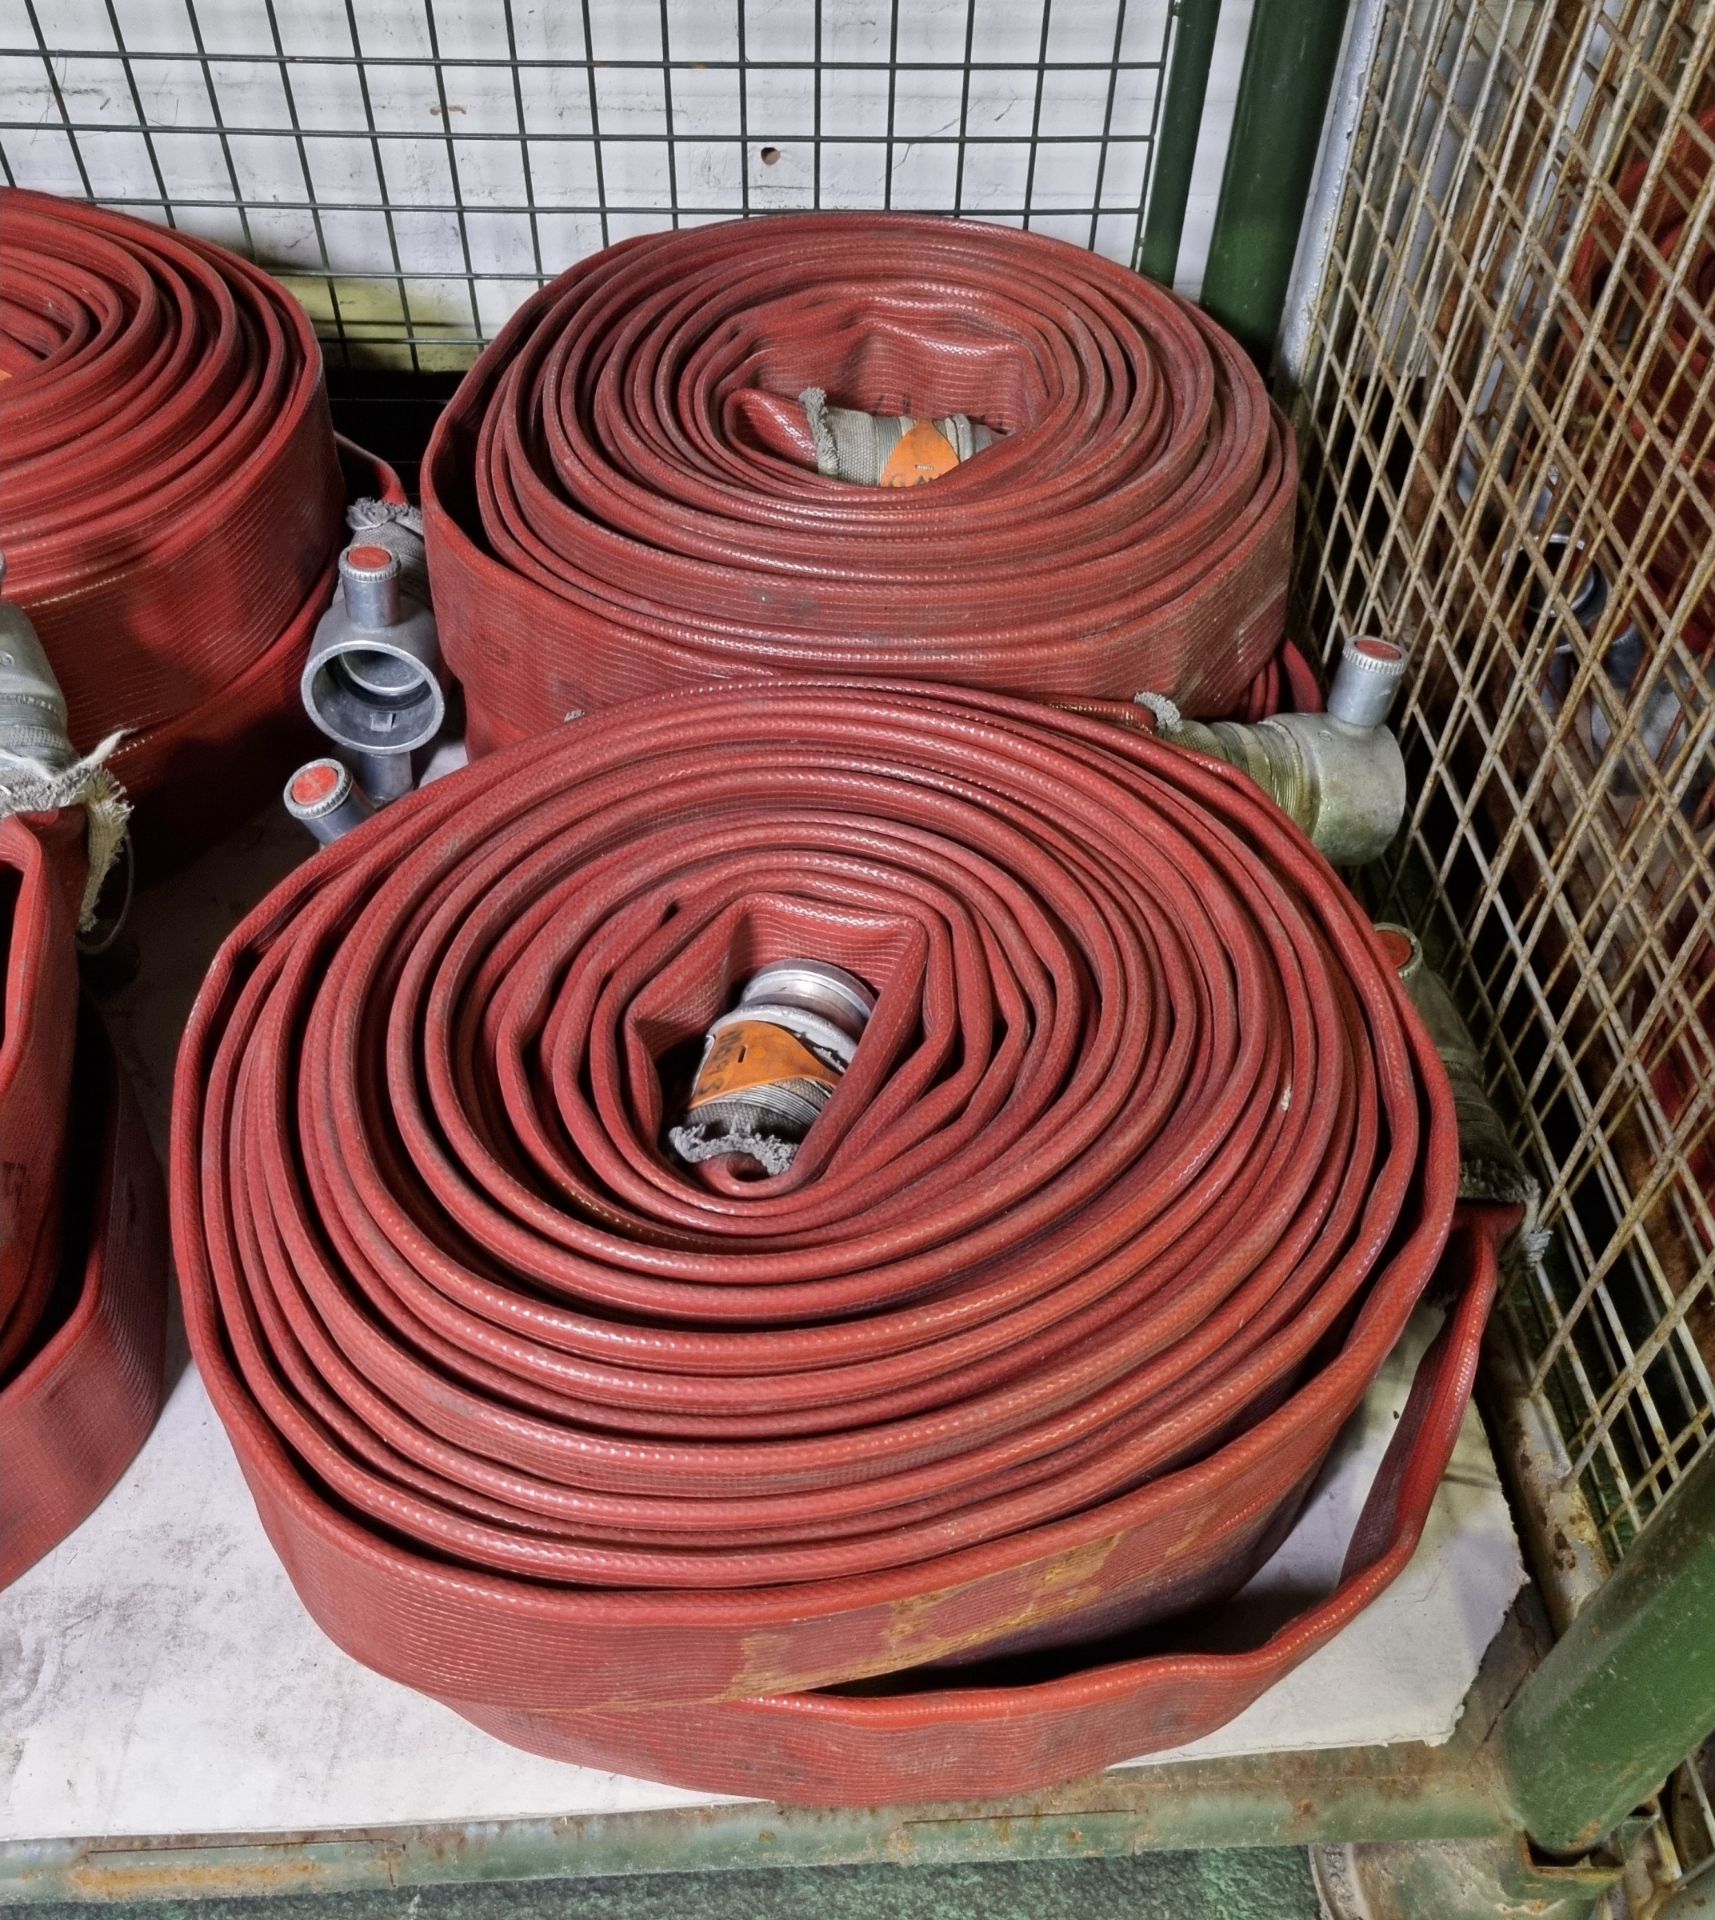 8x Angus Duraline 70mm lay flat hoses with couplings - approx 23 M in length - Image 3 of 4